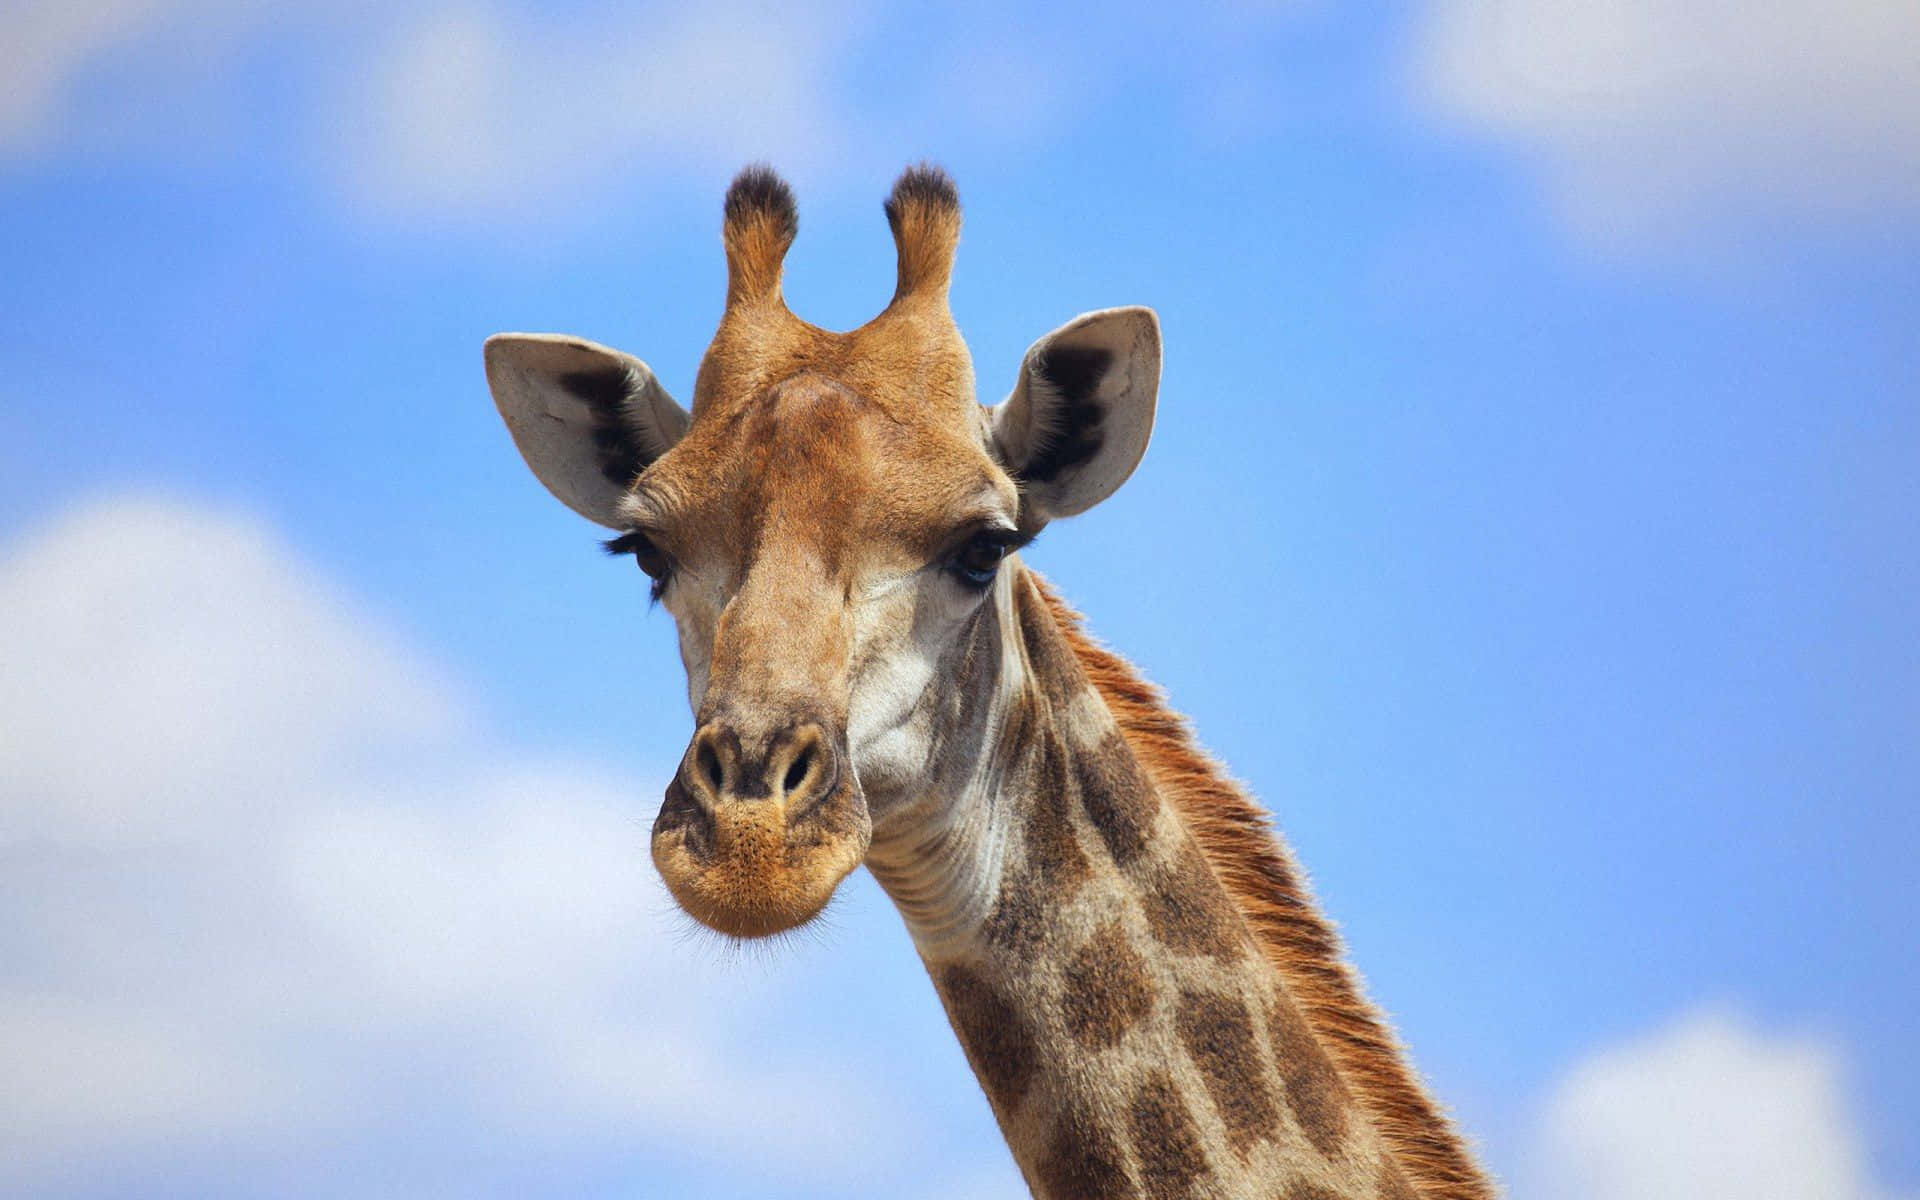 Share This Funny Giraffe Face With Friends Wallpaper